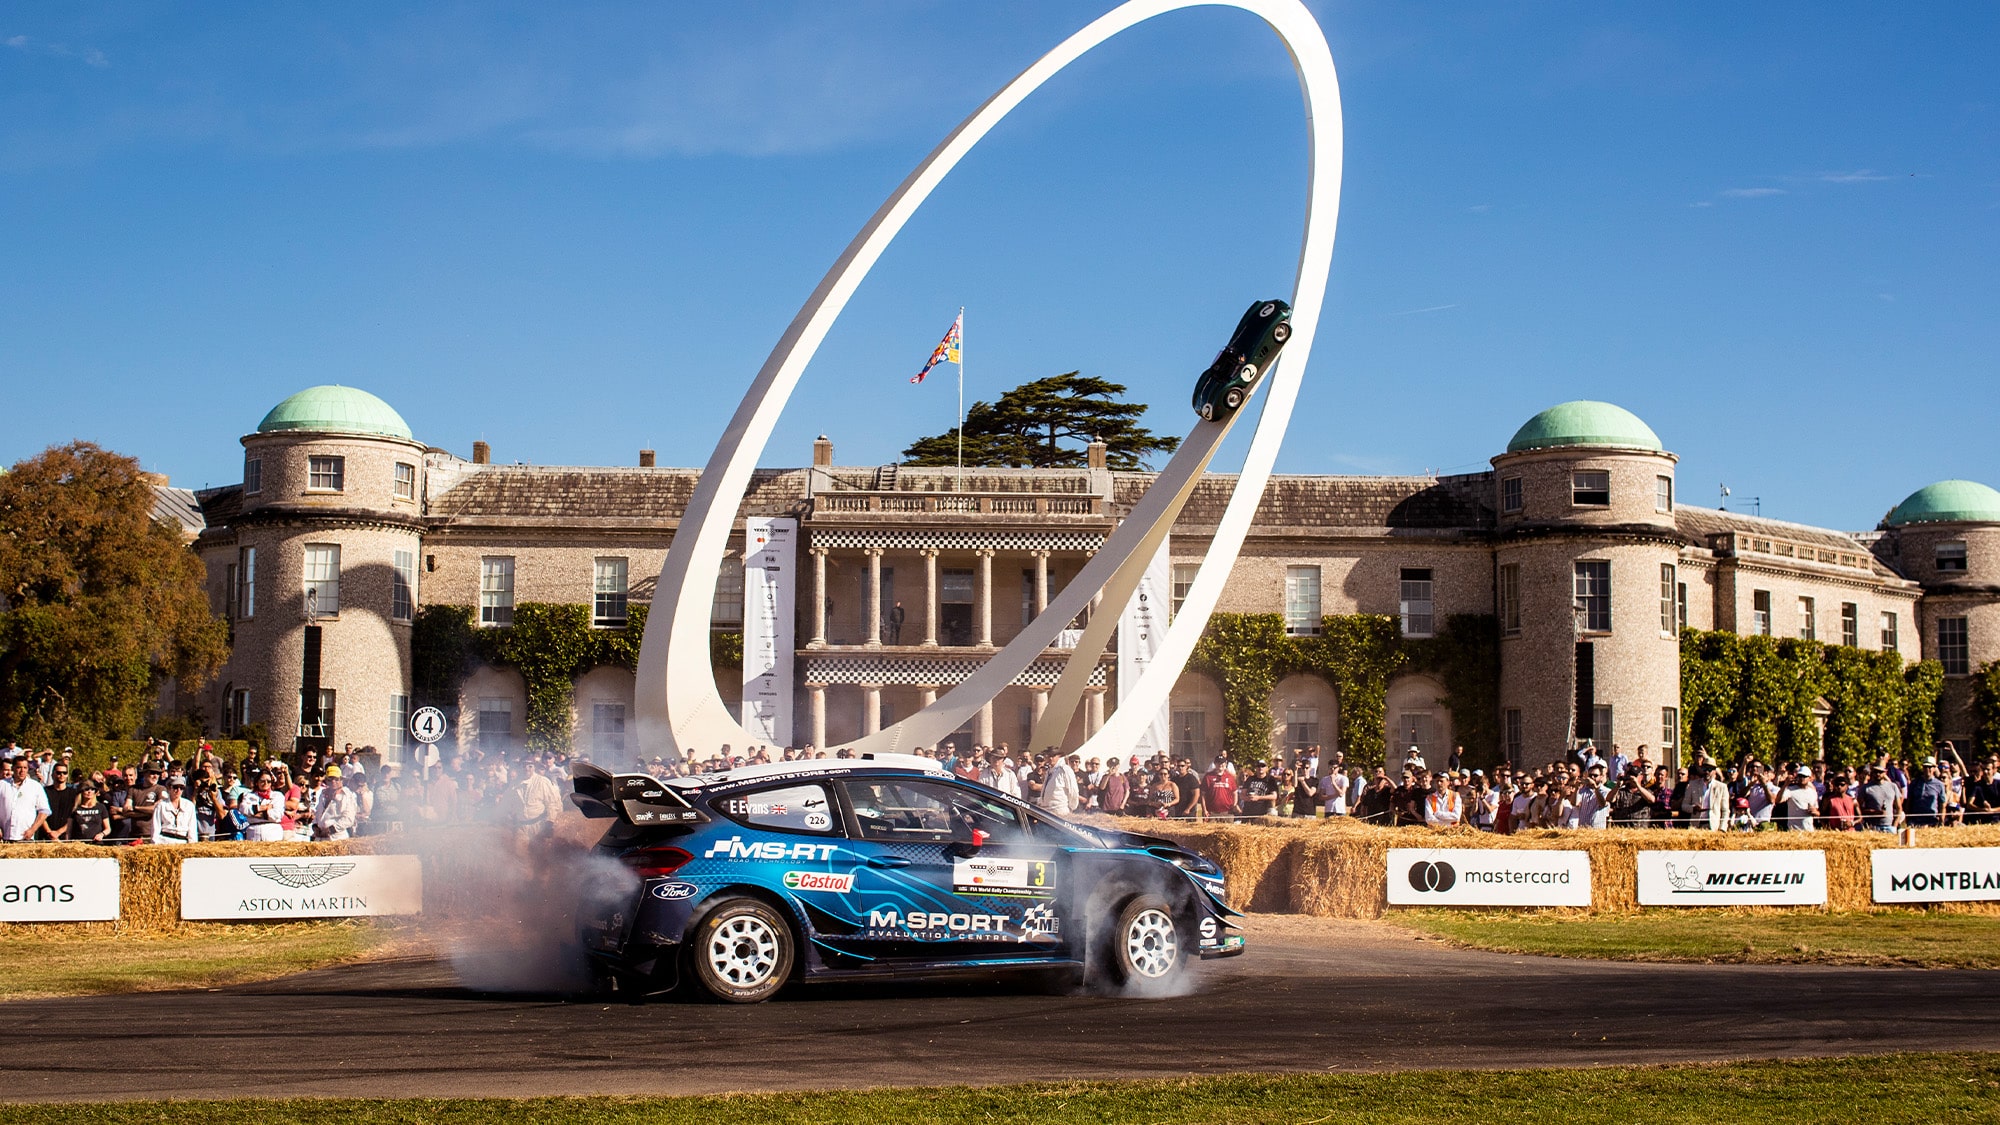 From small things remembering the firstever Goodwood Festival of